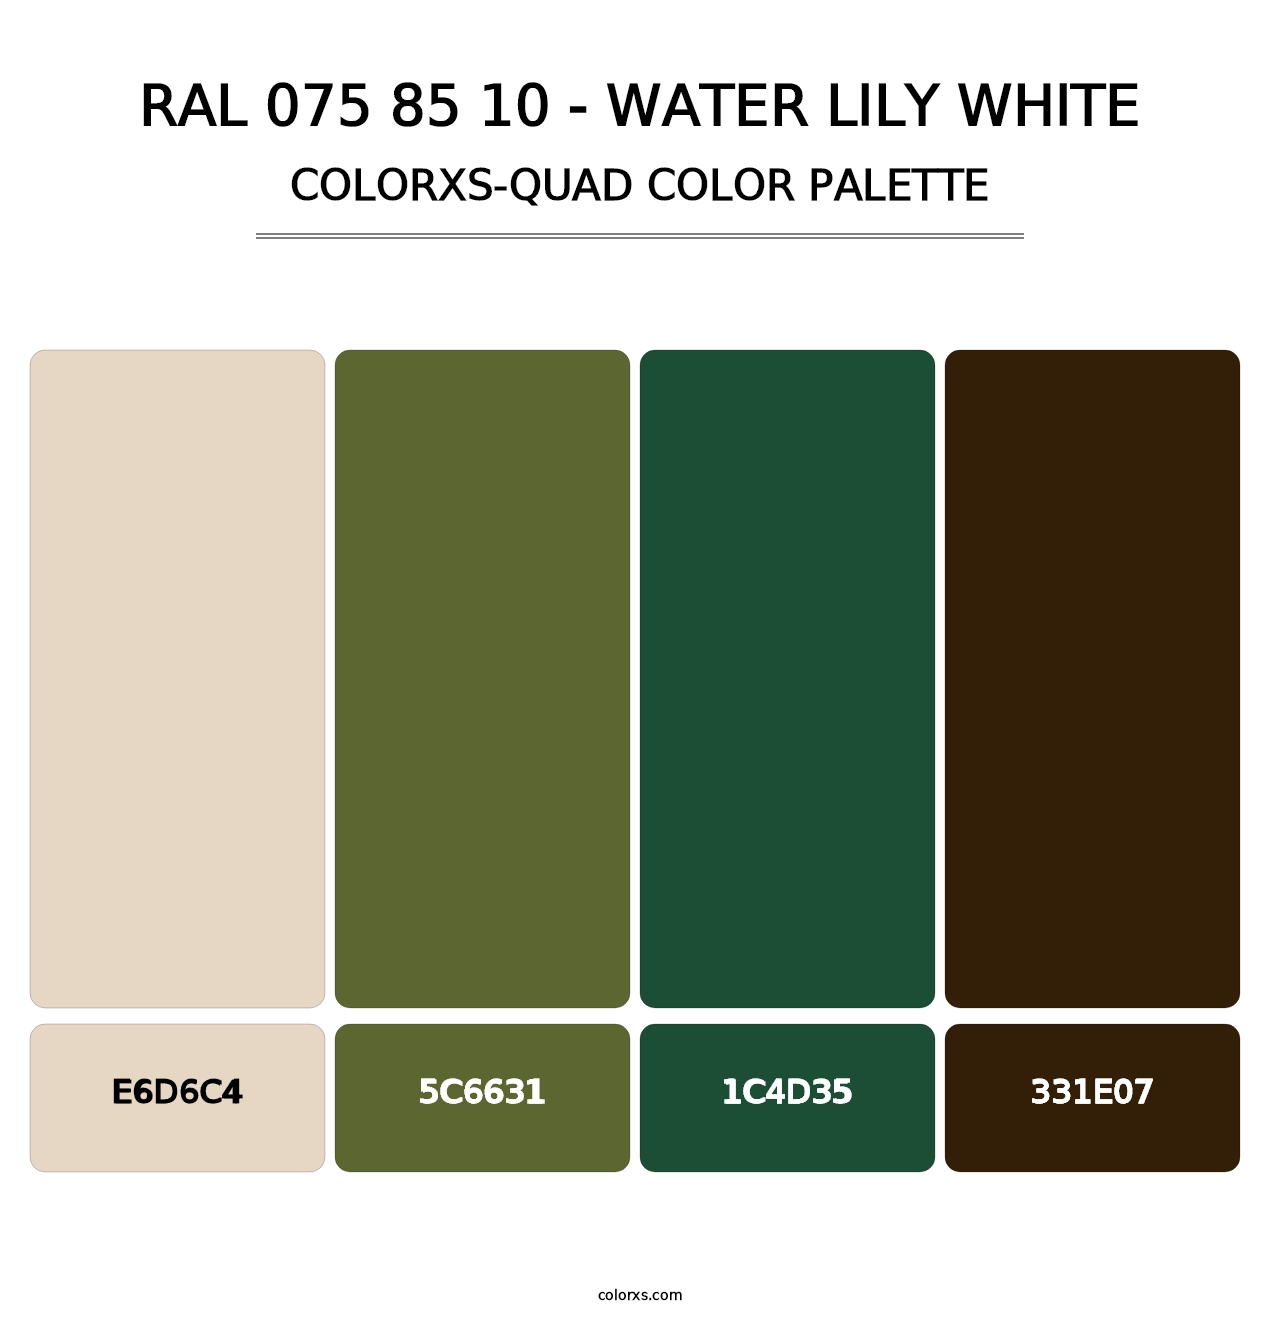 RAL 075 85 10 - Water Lily White - Colorxs Quad Palette